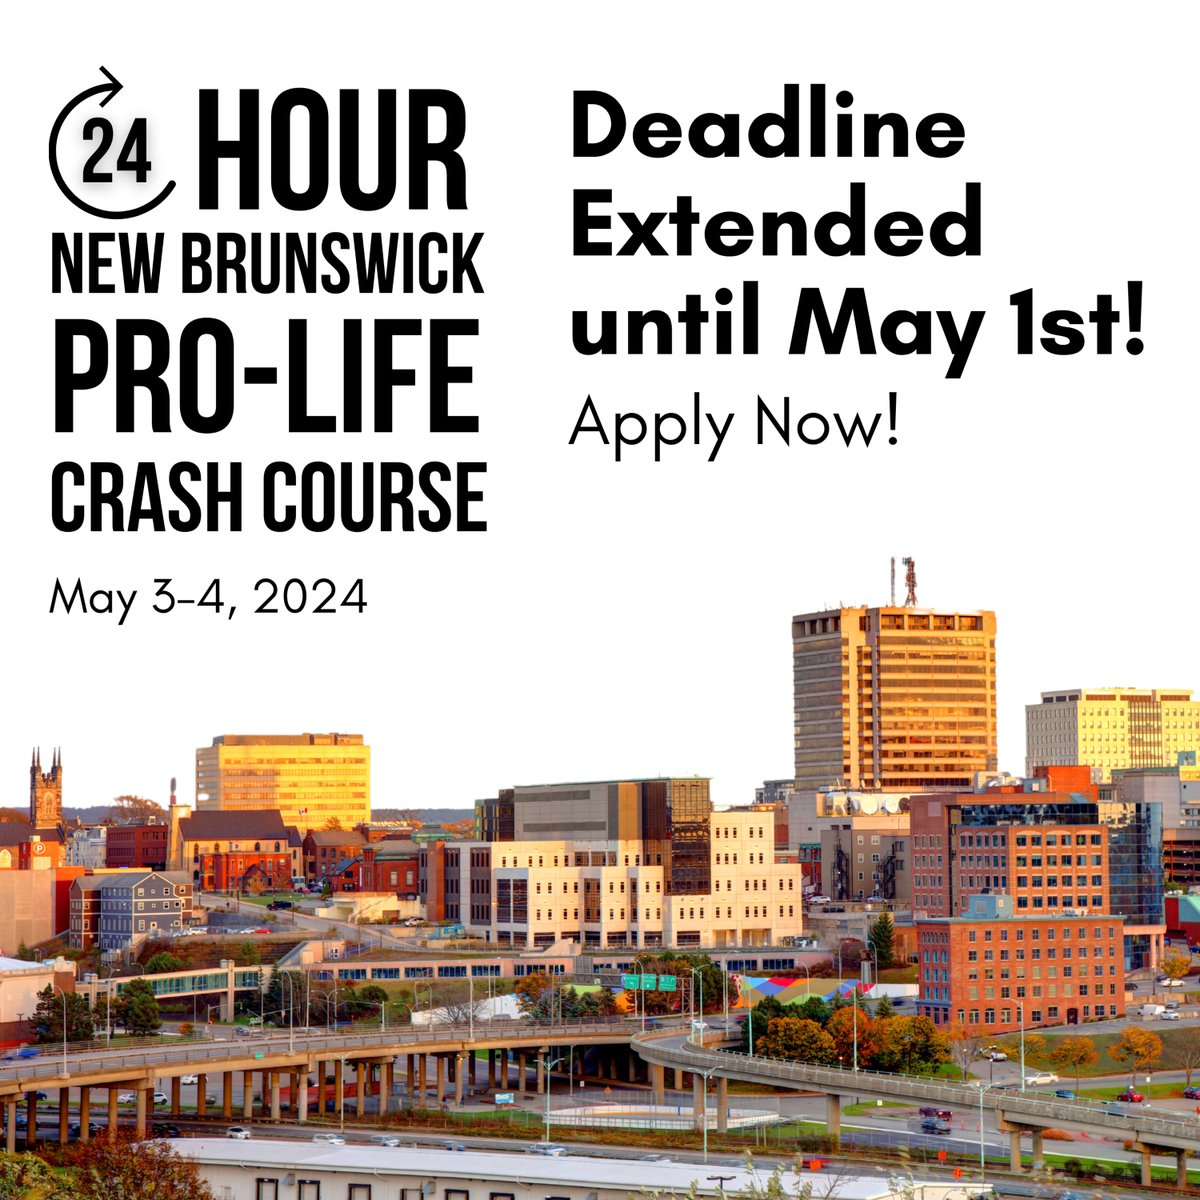 DEADLINE EXTENDED! There's still a few days to get in on our first ever New Brunswick Crash Course! Apply quickly!

#endthekilling #newbrunswick #antiabortion #humanrights #prolife